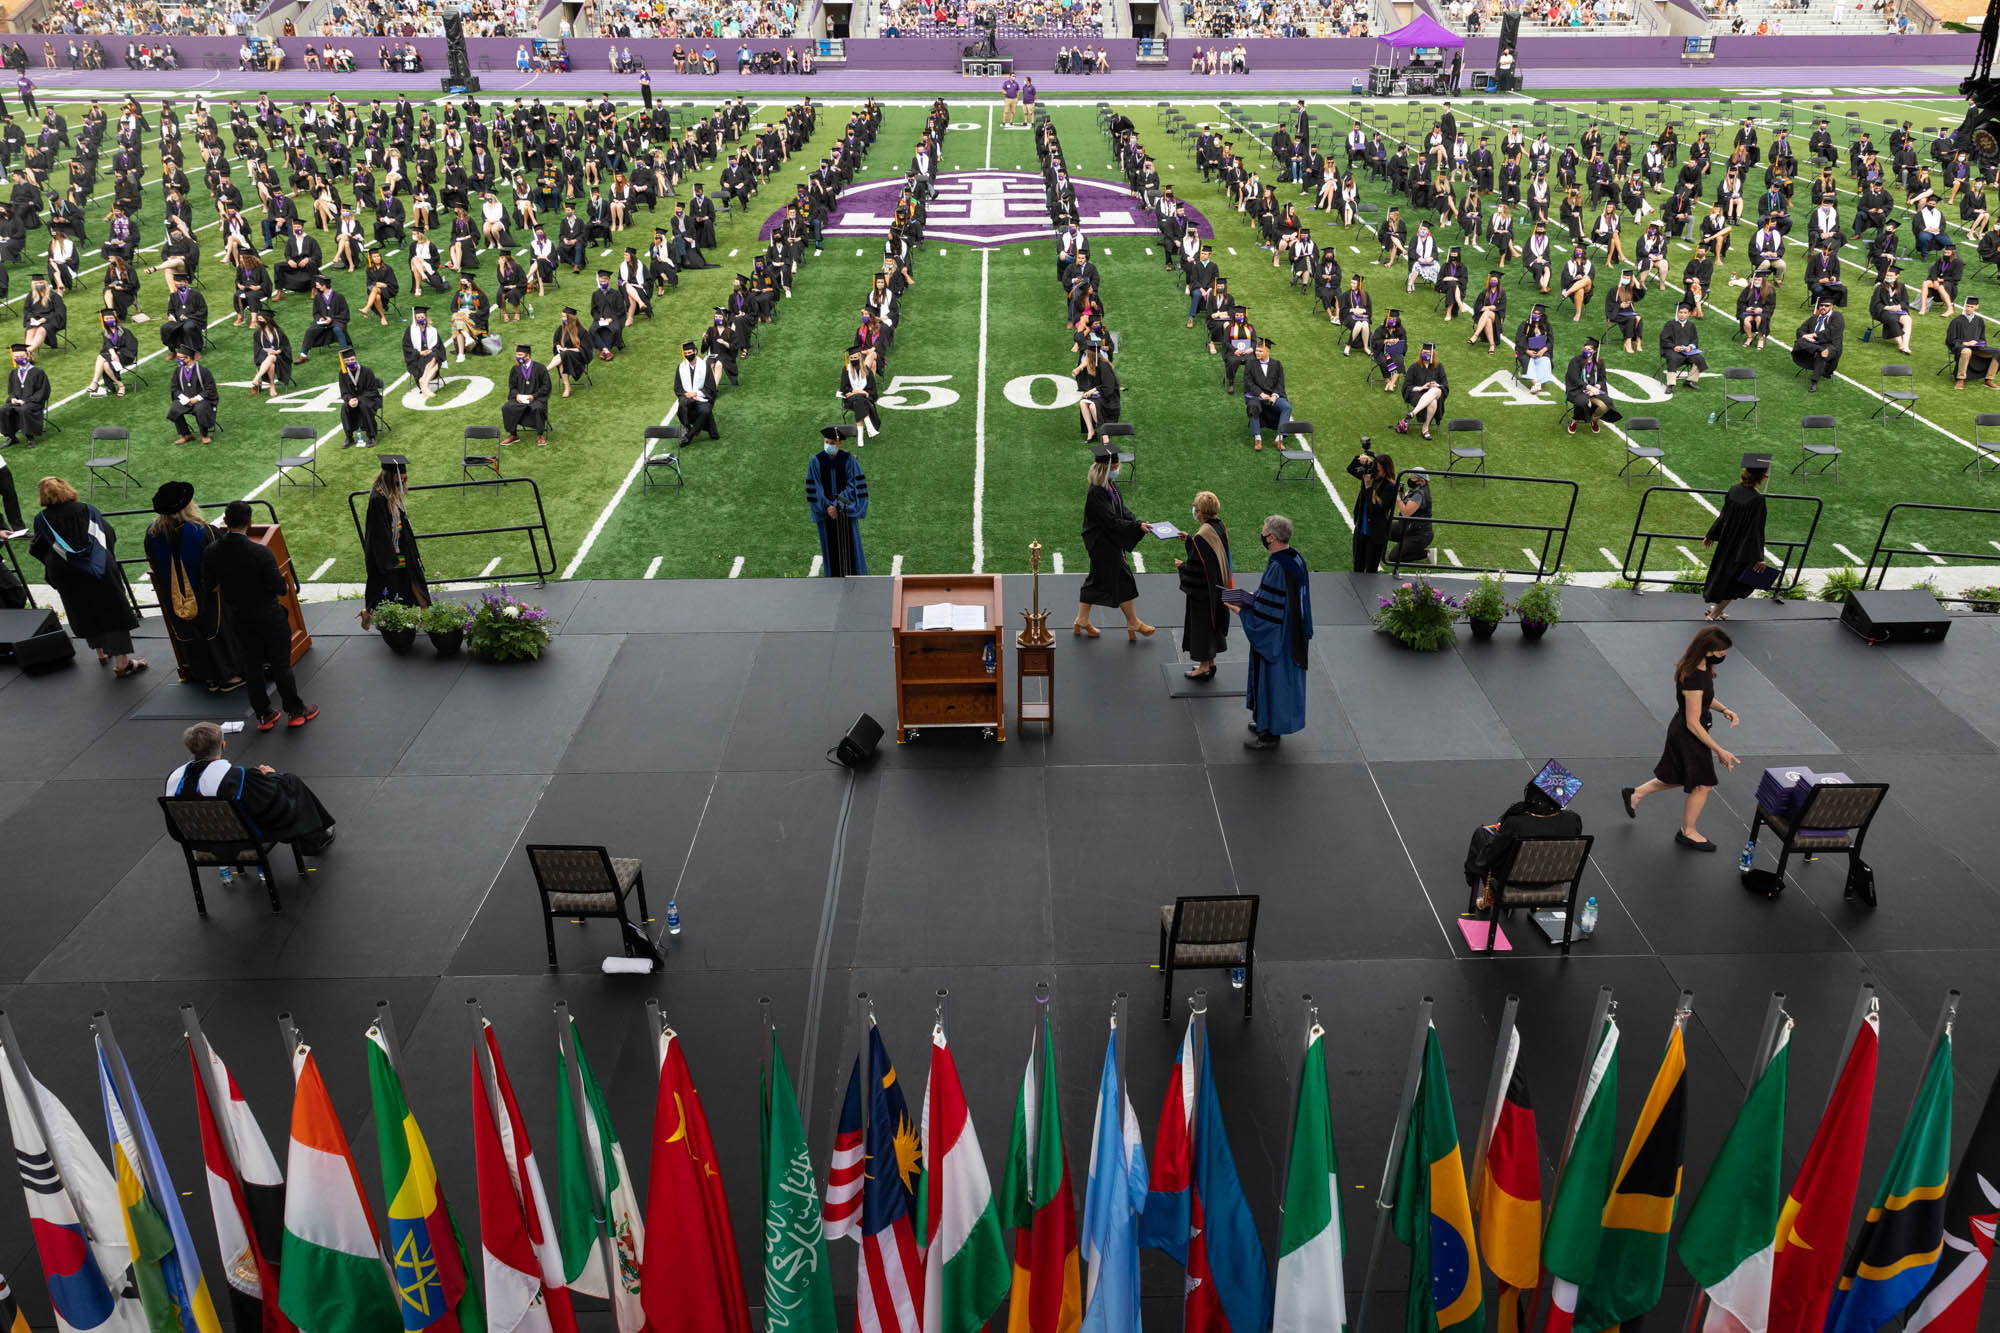 President Sullivan hands out diplomas during the 9am commencement ceremony in O’Shaughnessy Stadium in St. Paul on May 22, 2021.